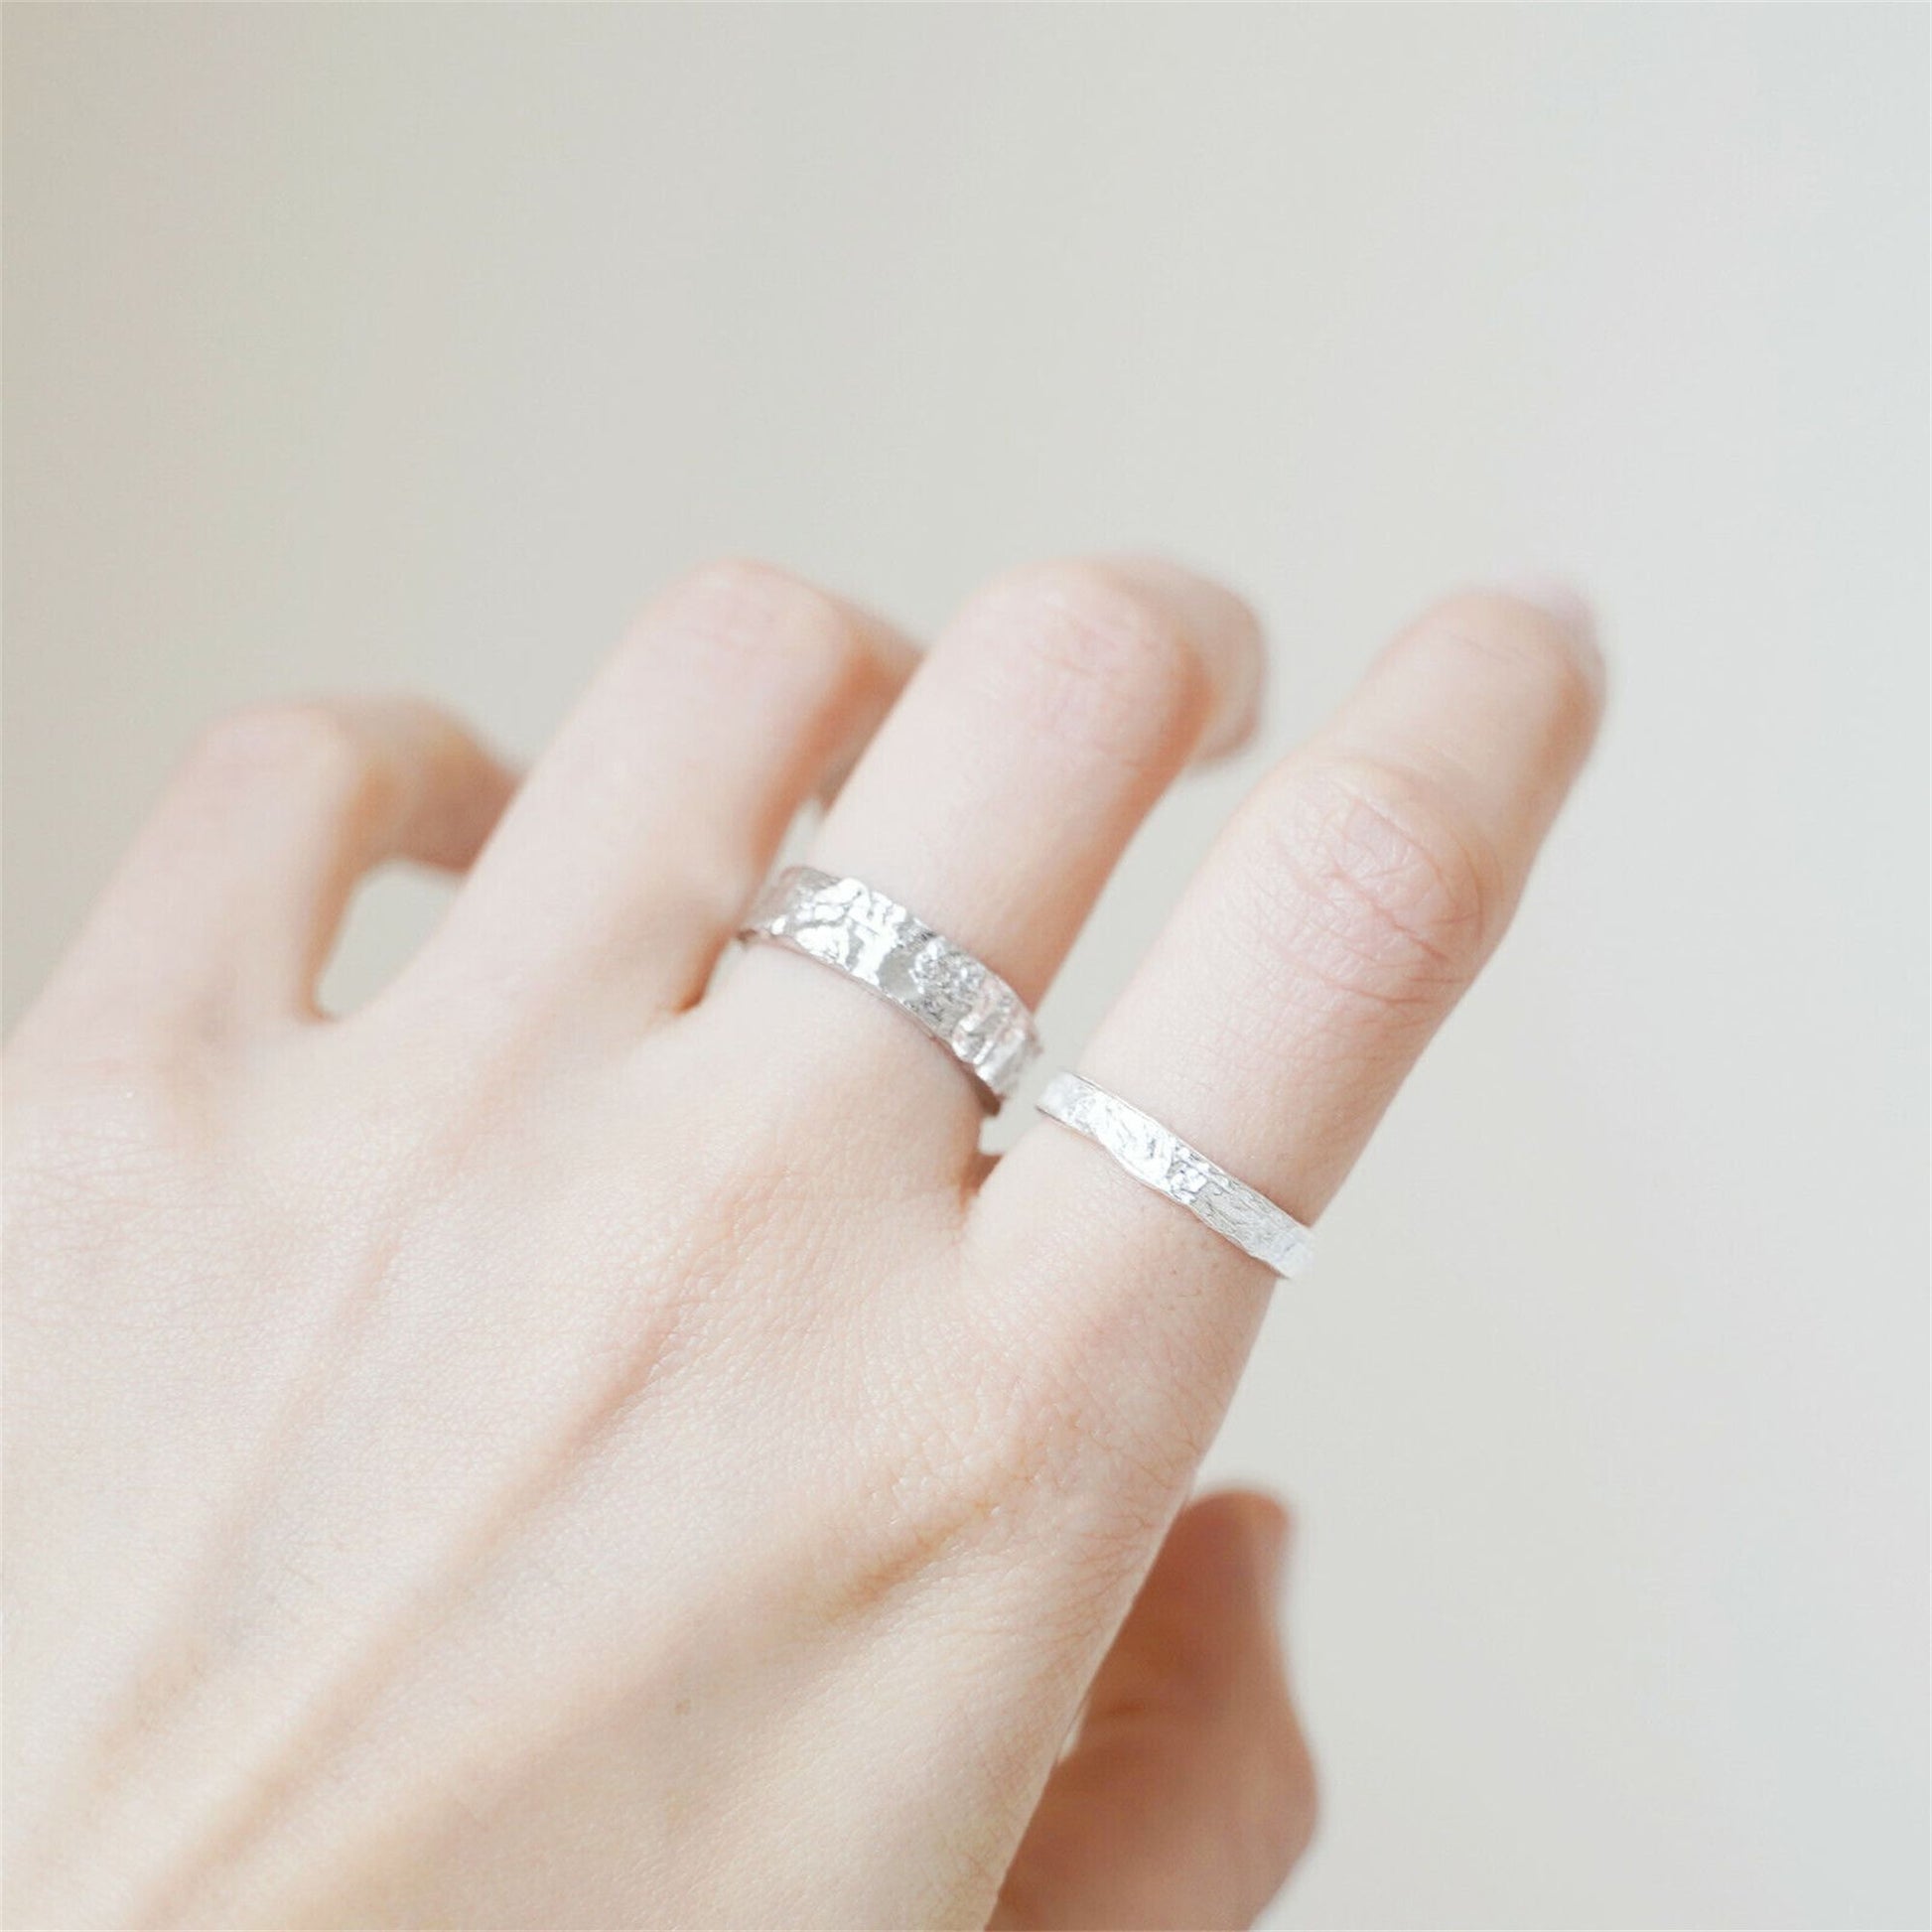 Sterling Silver Hammered Foil Textured Shiny 3mm Width Open Band Ring Unisex - sugarkittenlondon